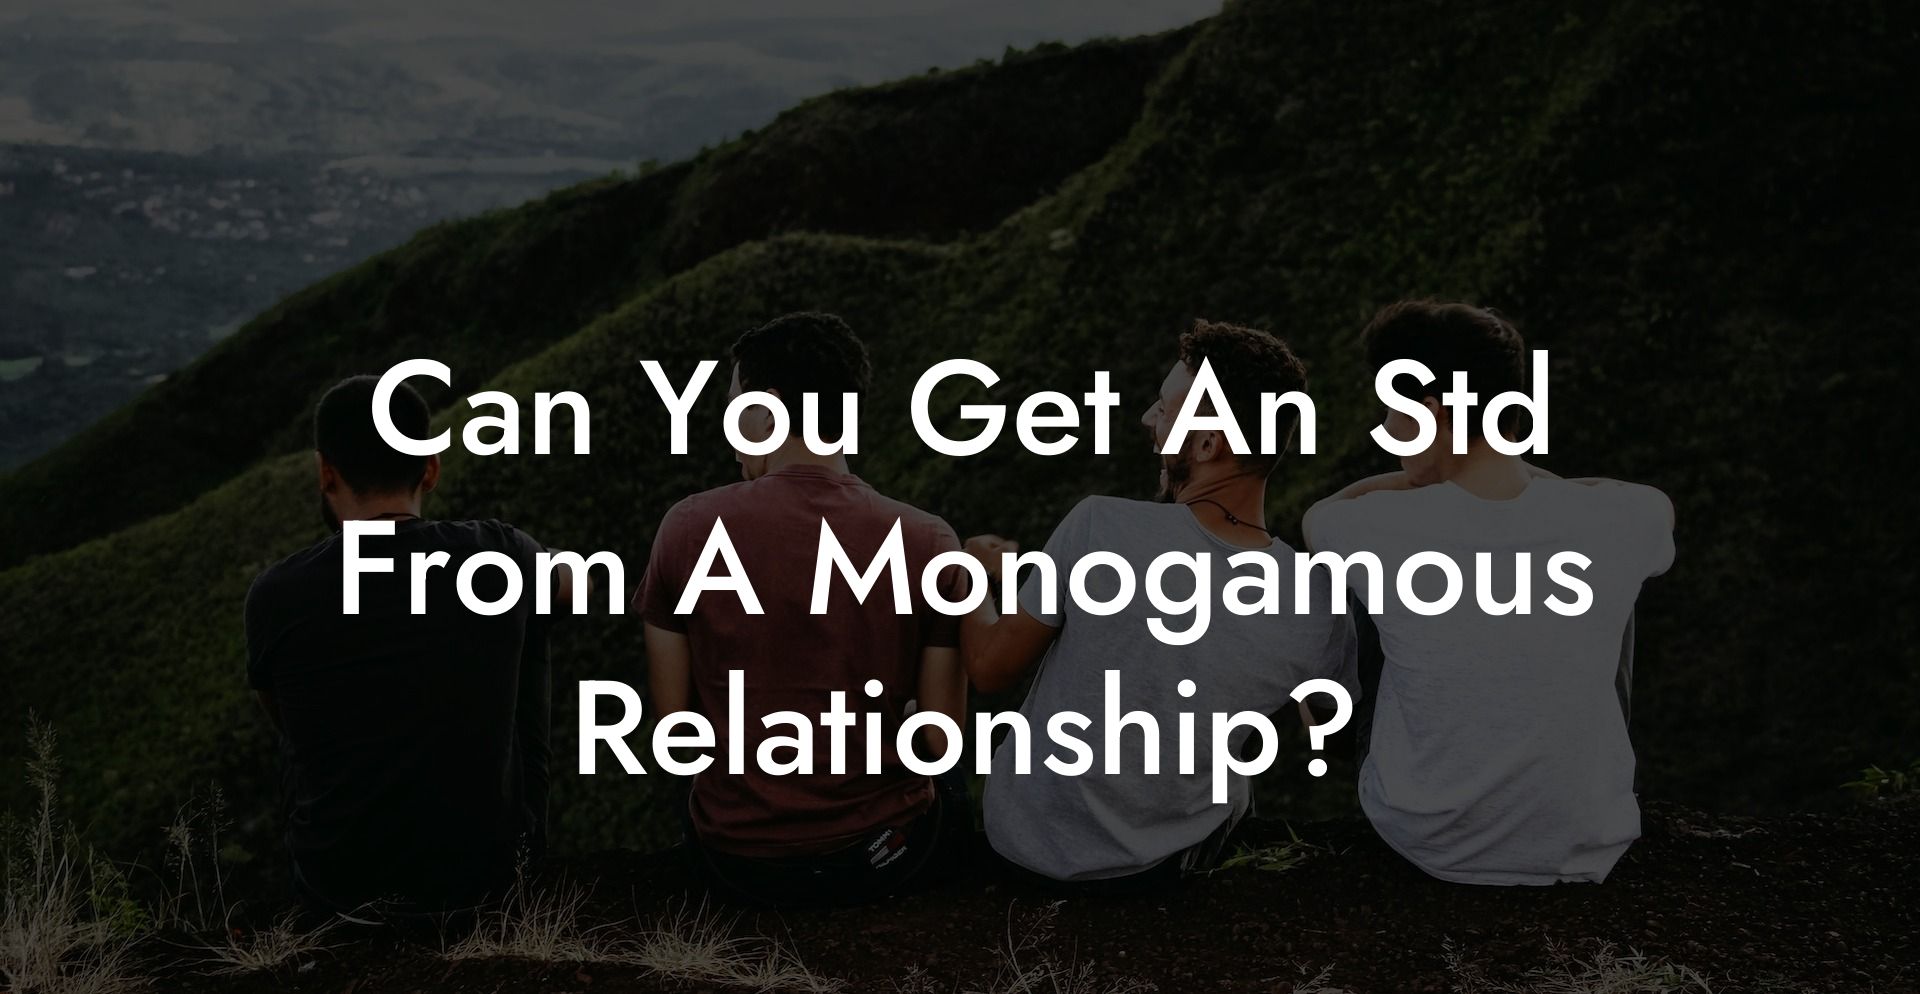 Can You Get An Std From A Monogamous Relationship?